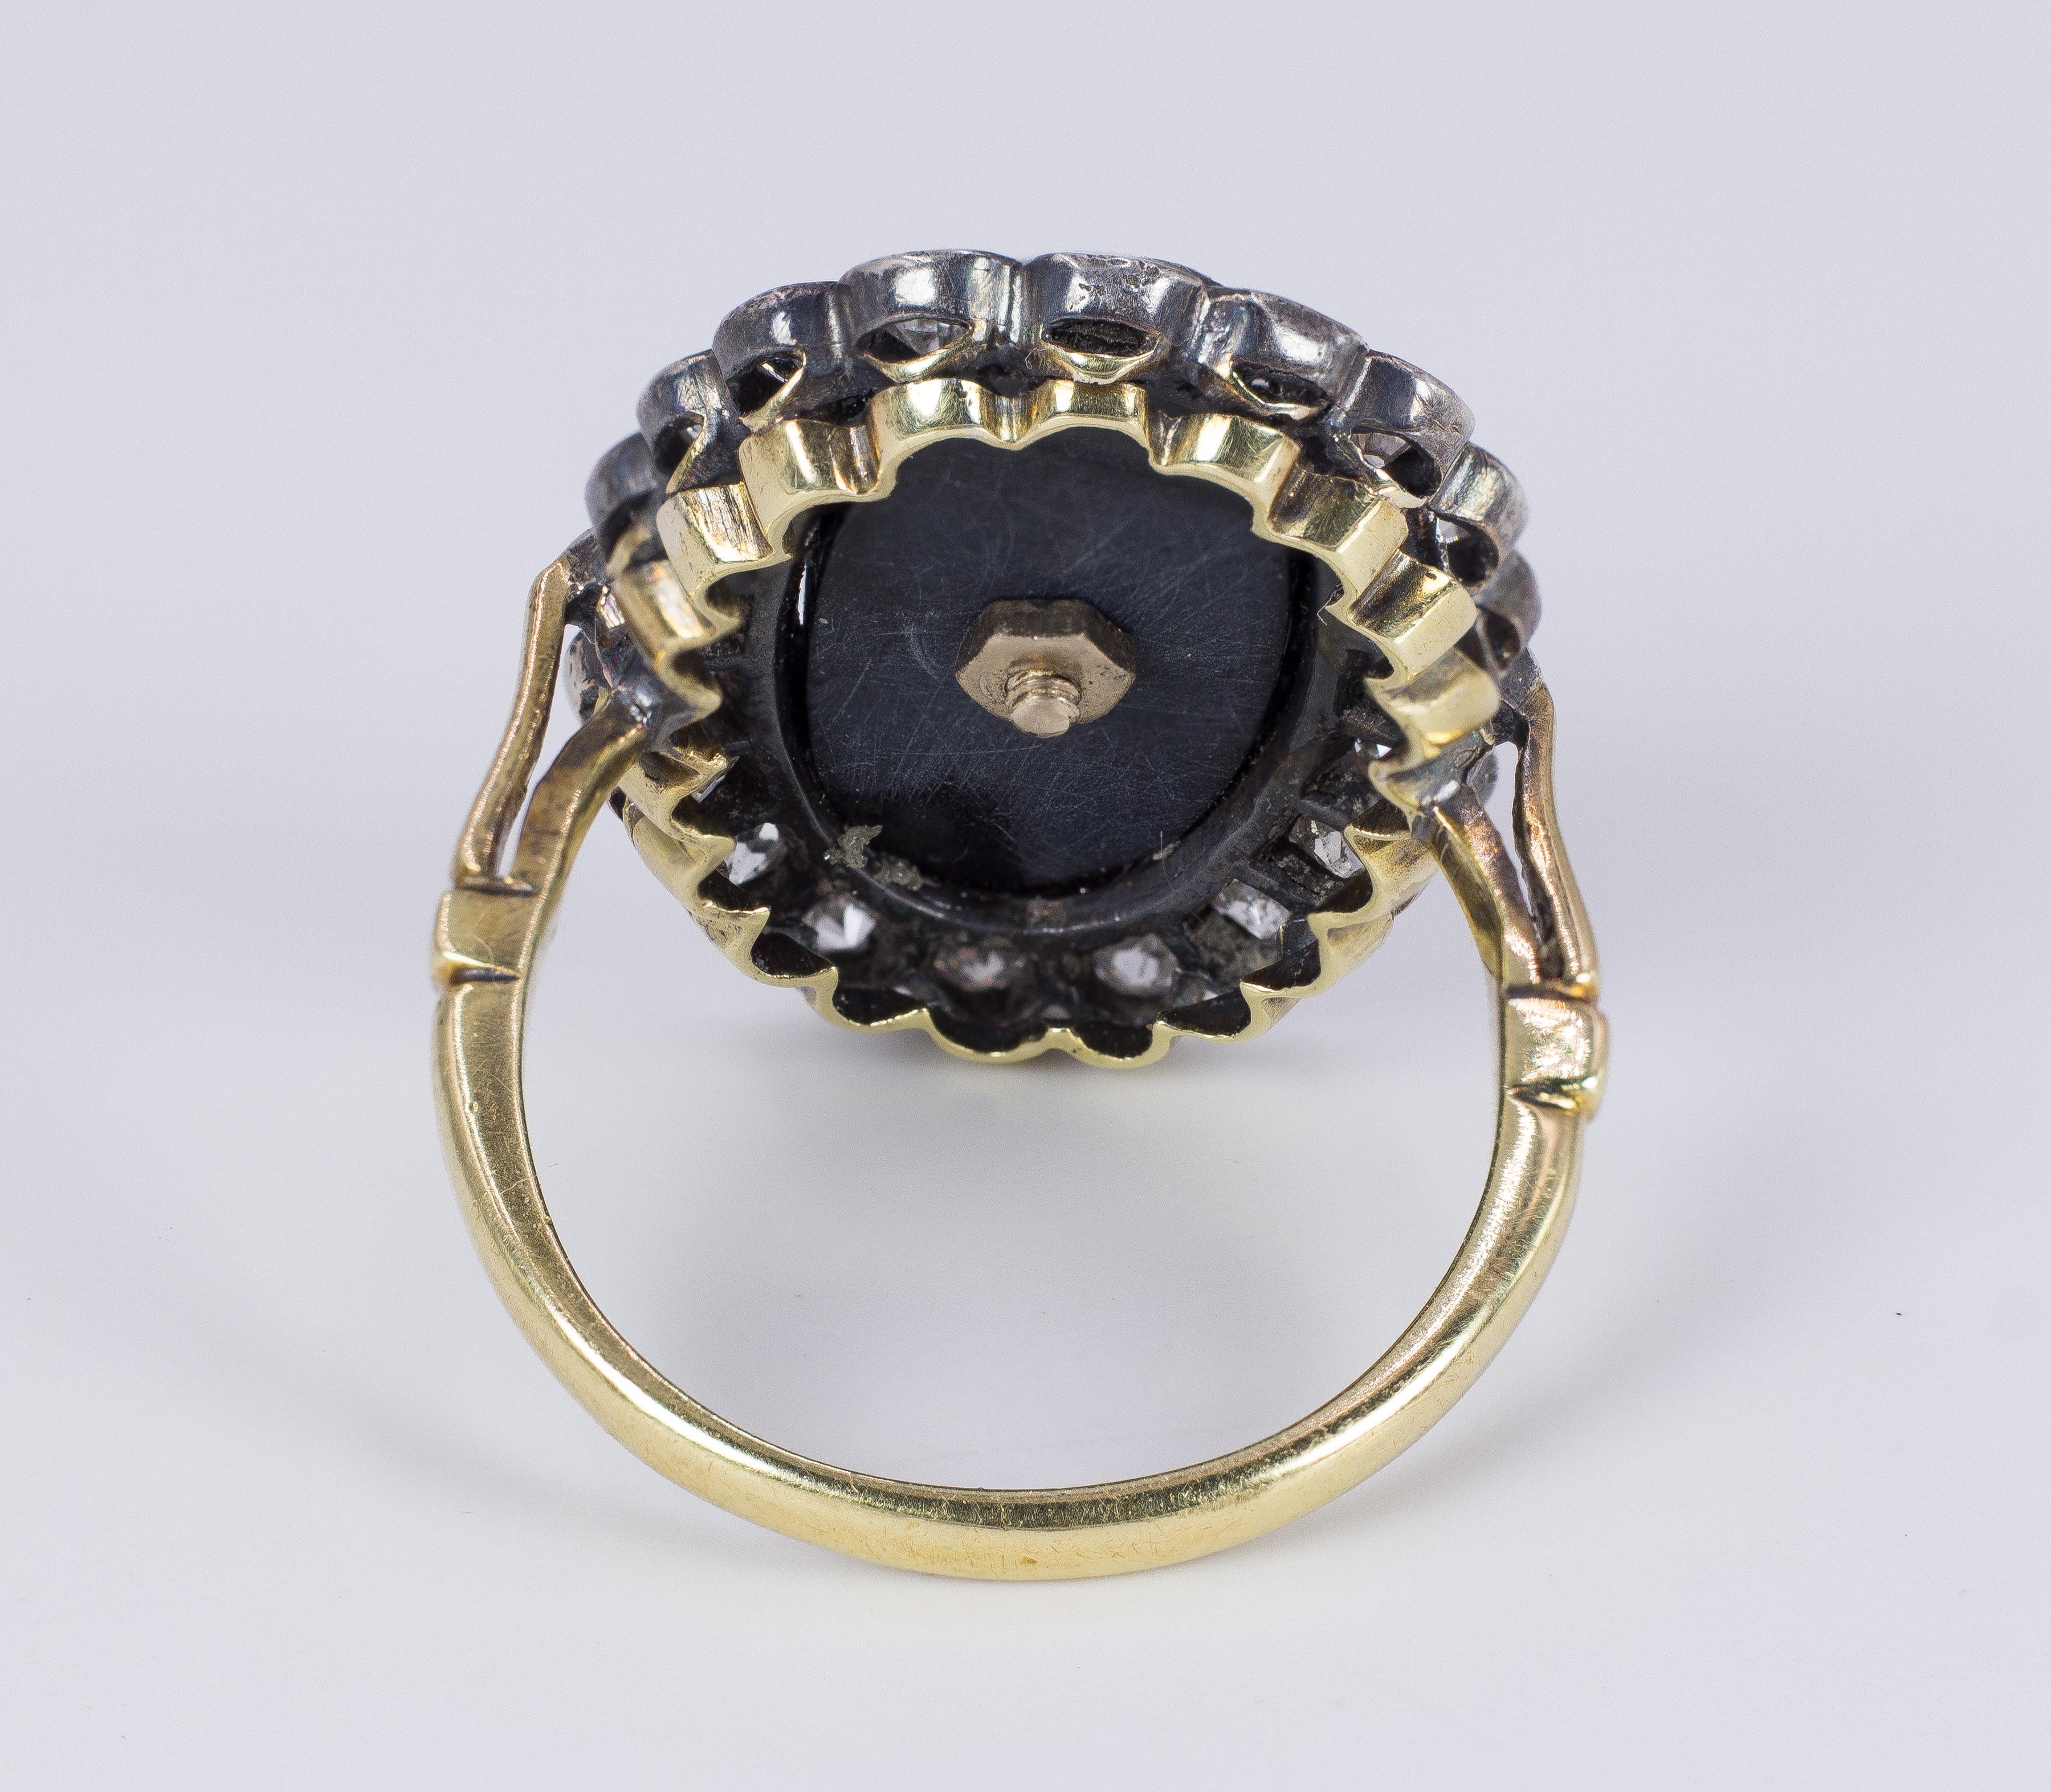 Rose Cut 18 Karat Gold, Silver, Onyx and 0.65 Carat Diamond Ring, Early 20th Century For Sale